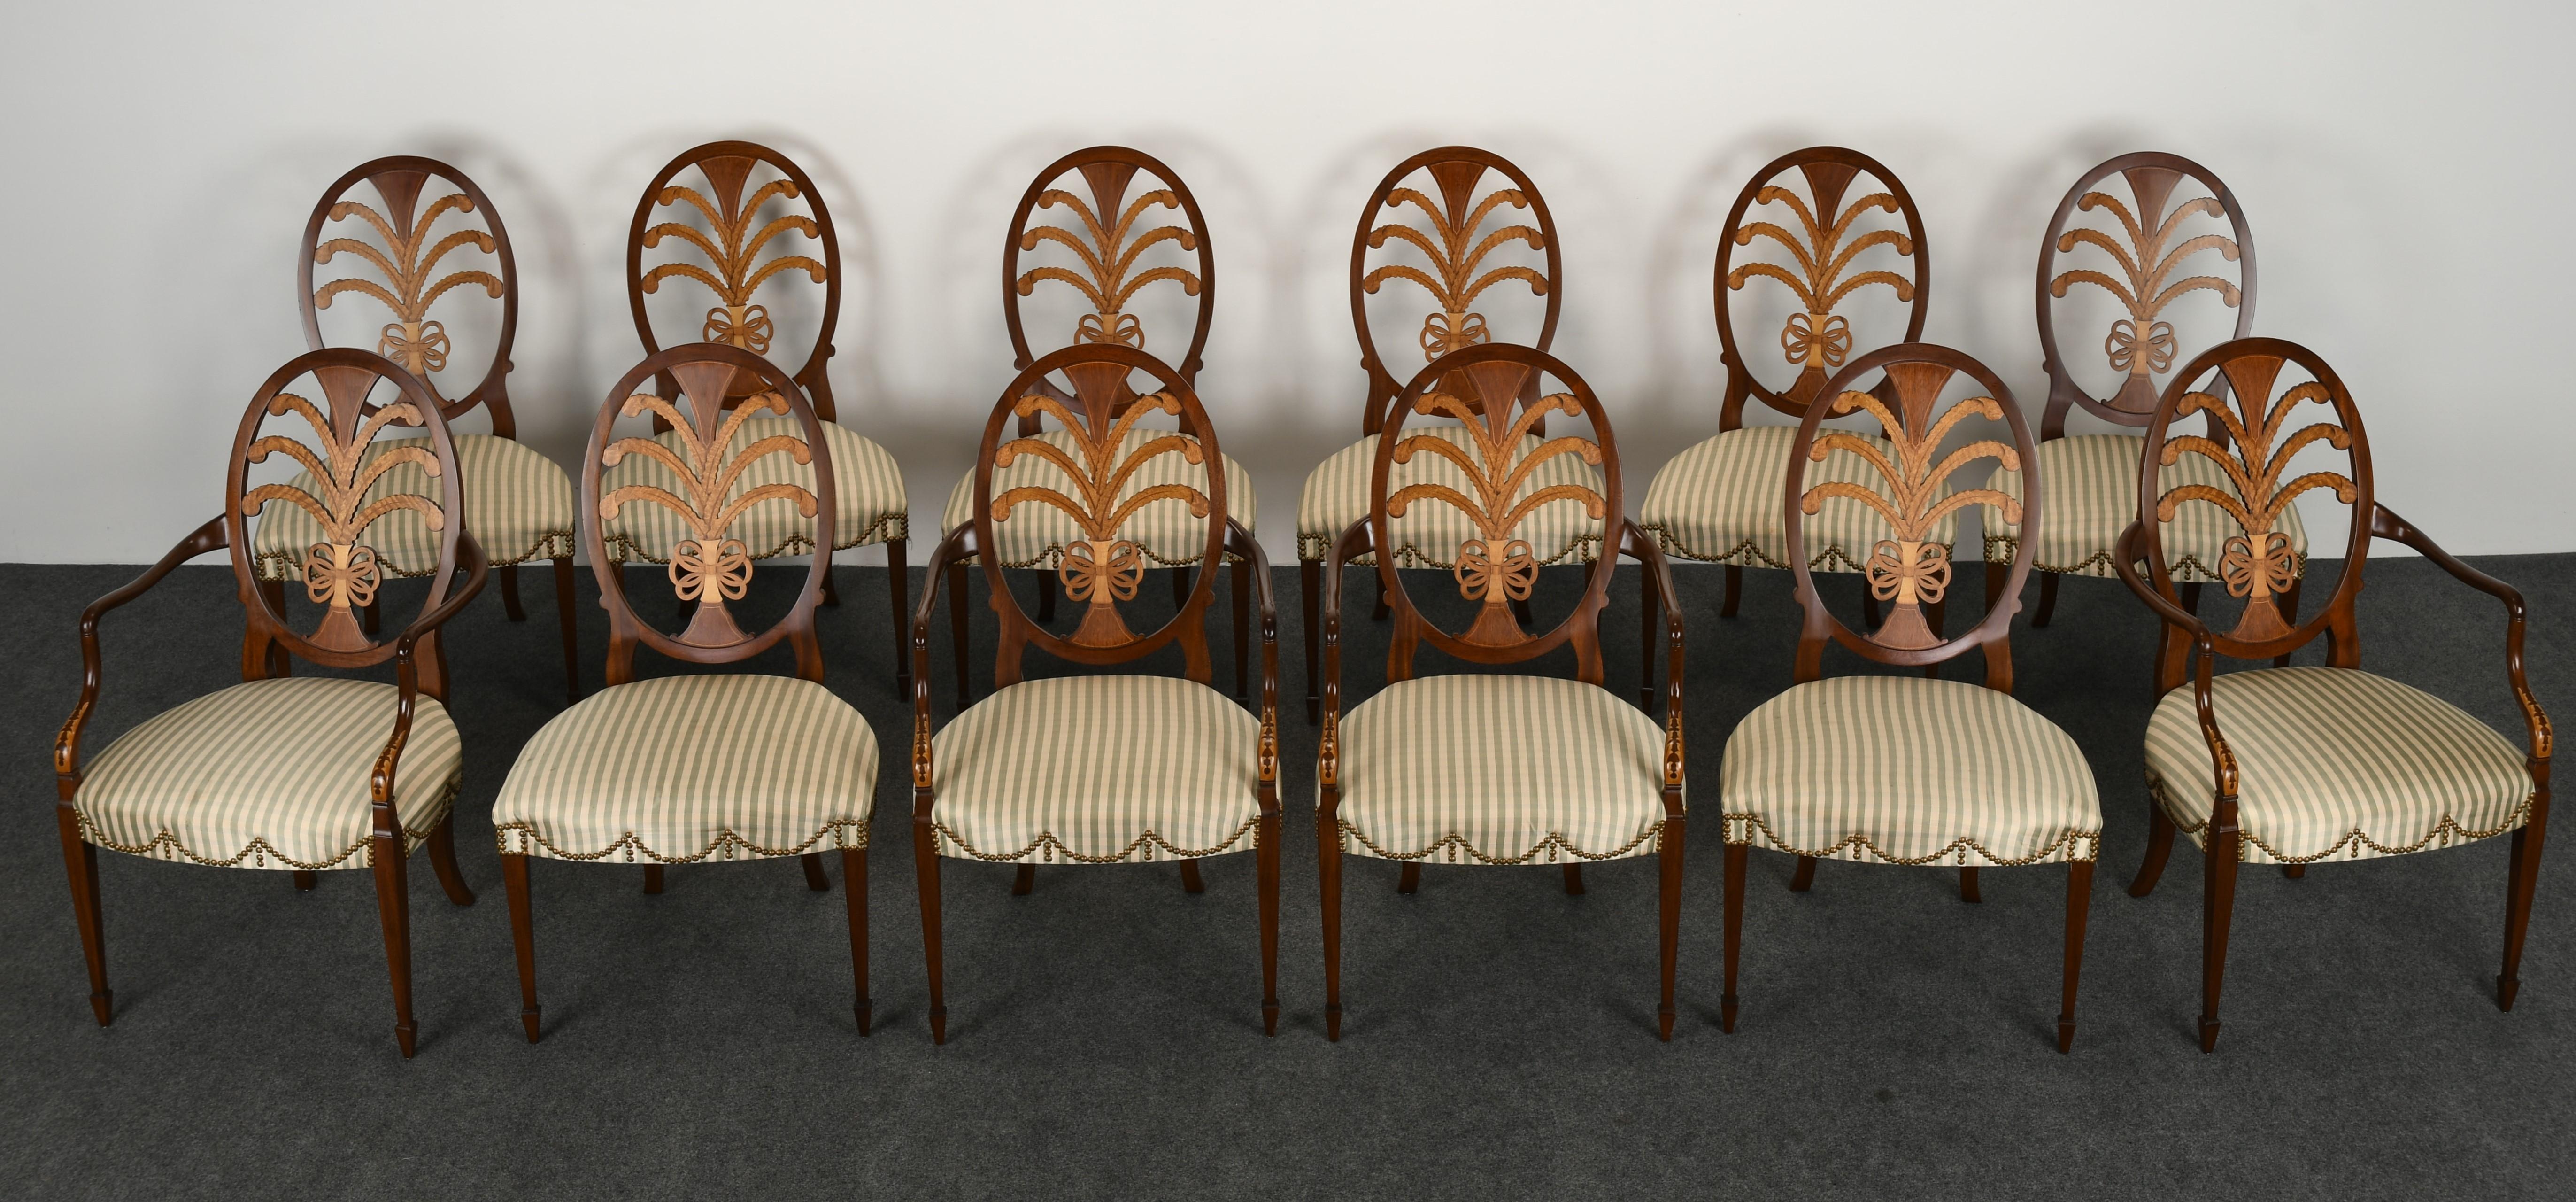 A fine pair of twelve Hepplewhite chairs by Karges. The chairs feature plumes and Satinwood inlay. The arms and spade feet are hand-carved with nail-head trim. There are 4 armchairs and 8 side chairs in this set. The chairs are in very good